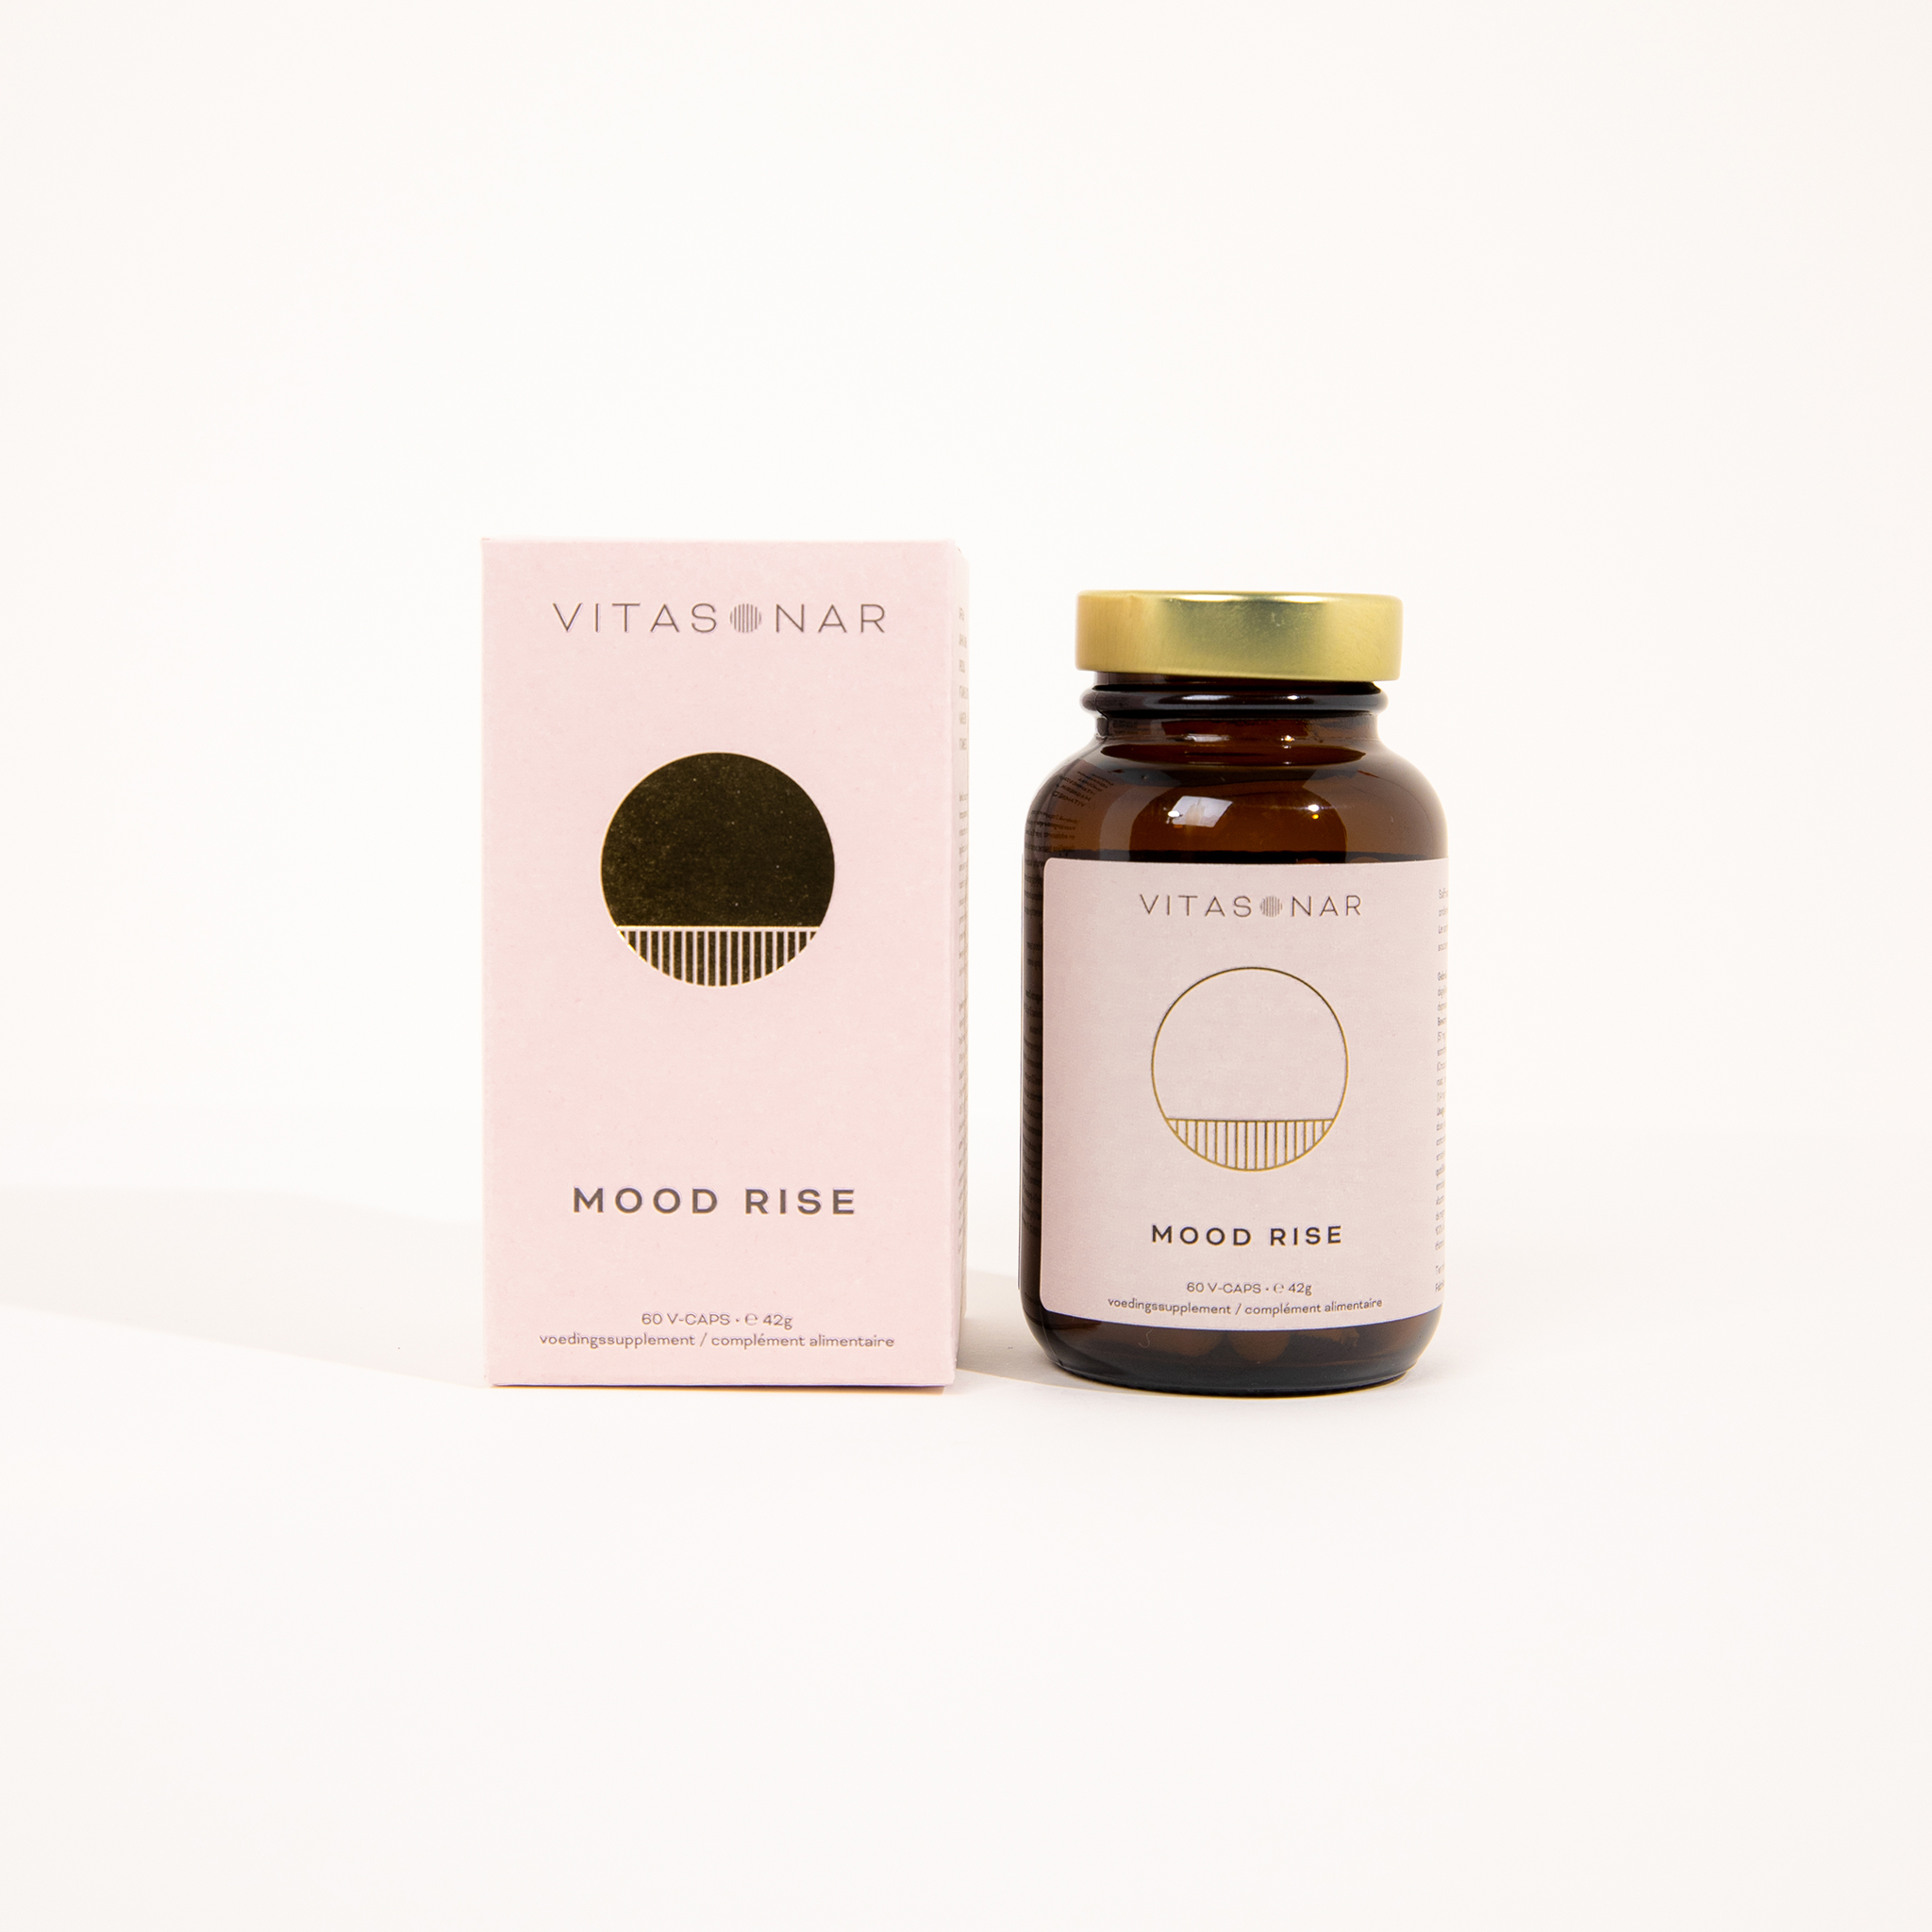 Mood Rise - box and bottle